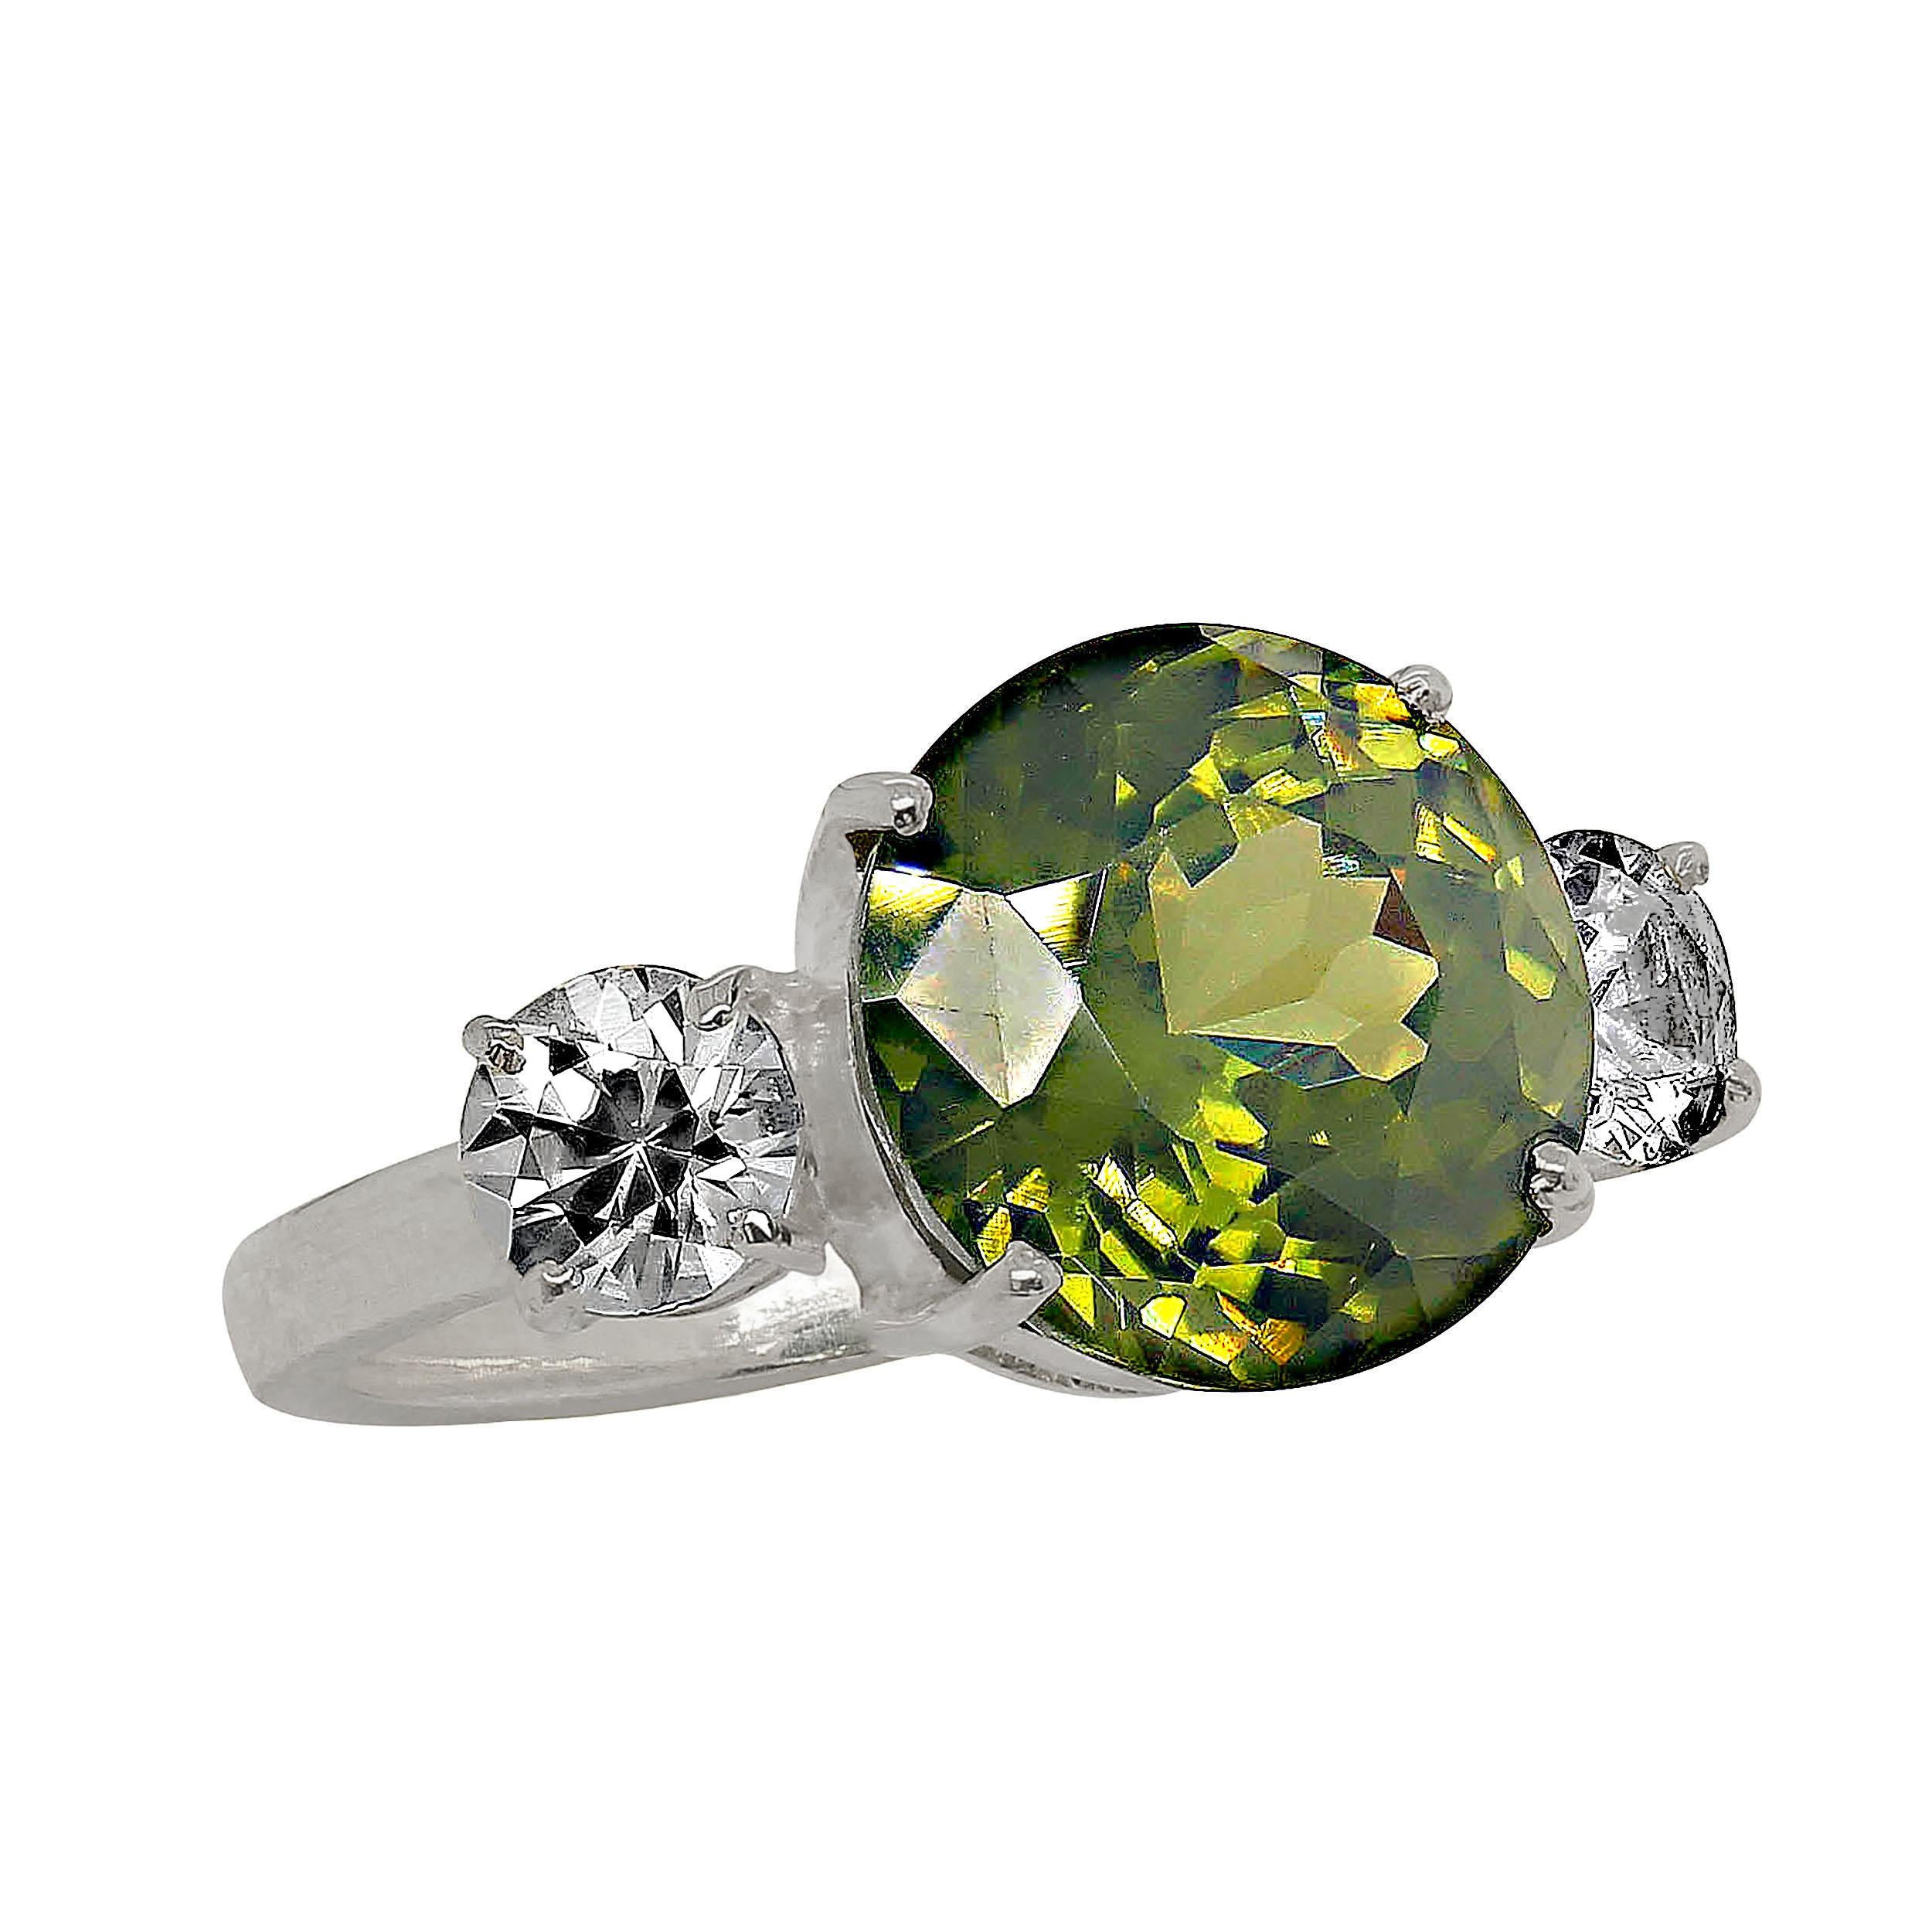 Women's or Men's AJD Sophisticated 'Big Deal' Green and White Zircon Cocktail Ring For Sale